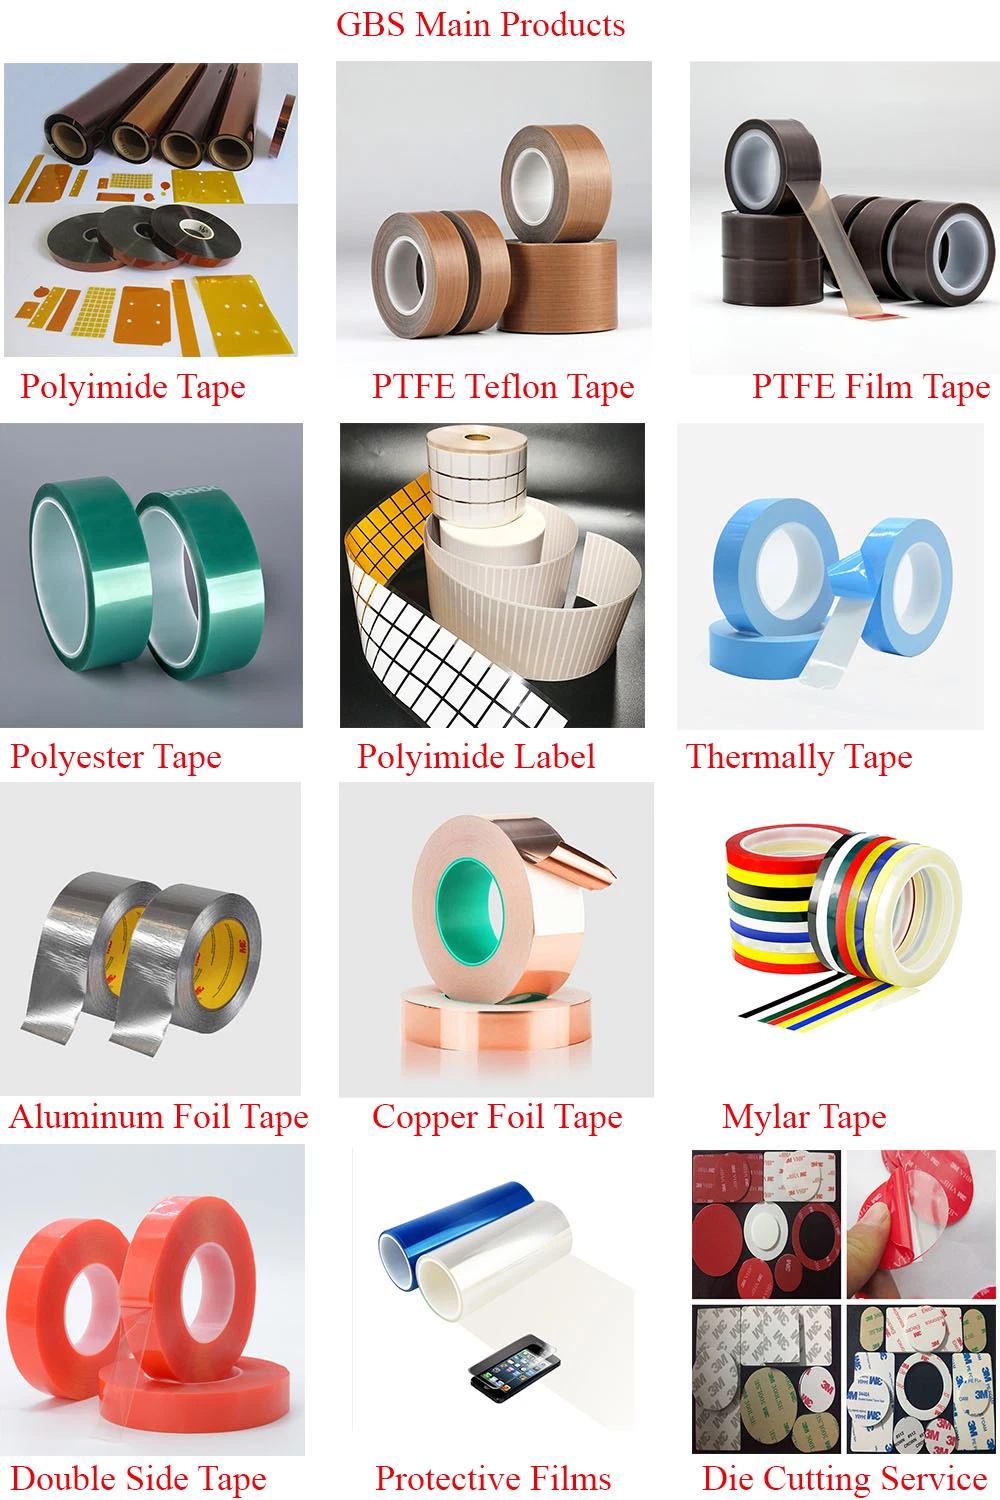 3m 898 Filament Reinforced Synthetic Rubber Adhesive Tape for Fiberboard Bundling &amp; Strapping